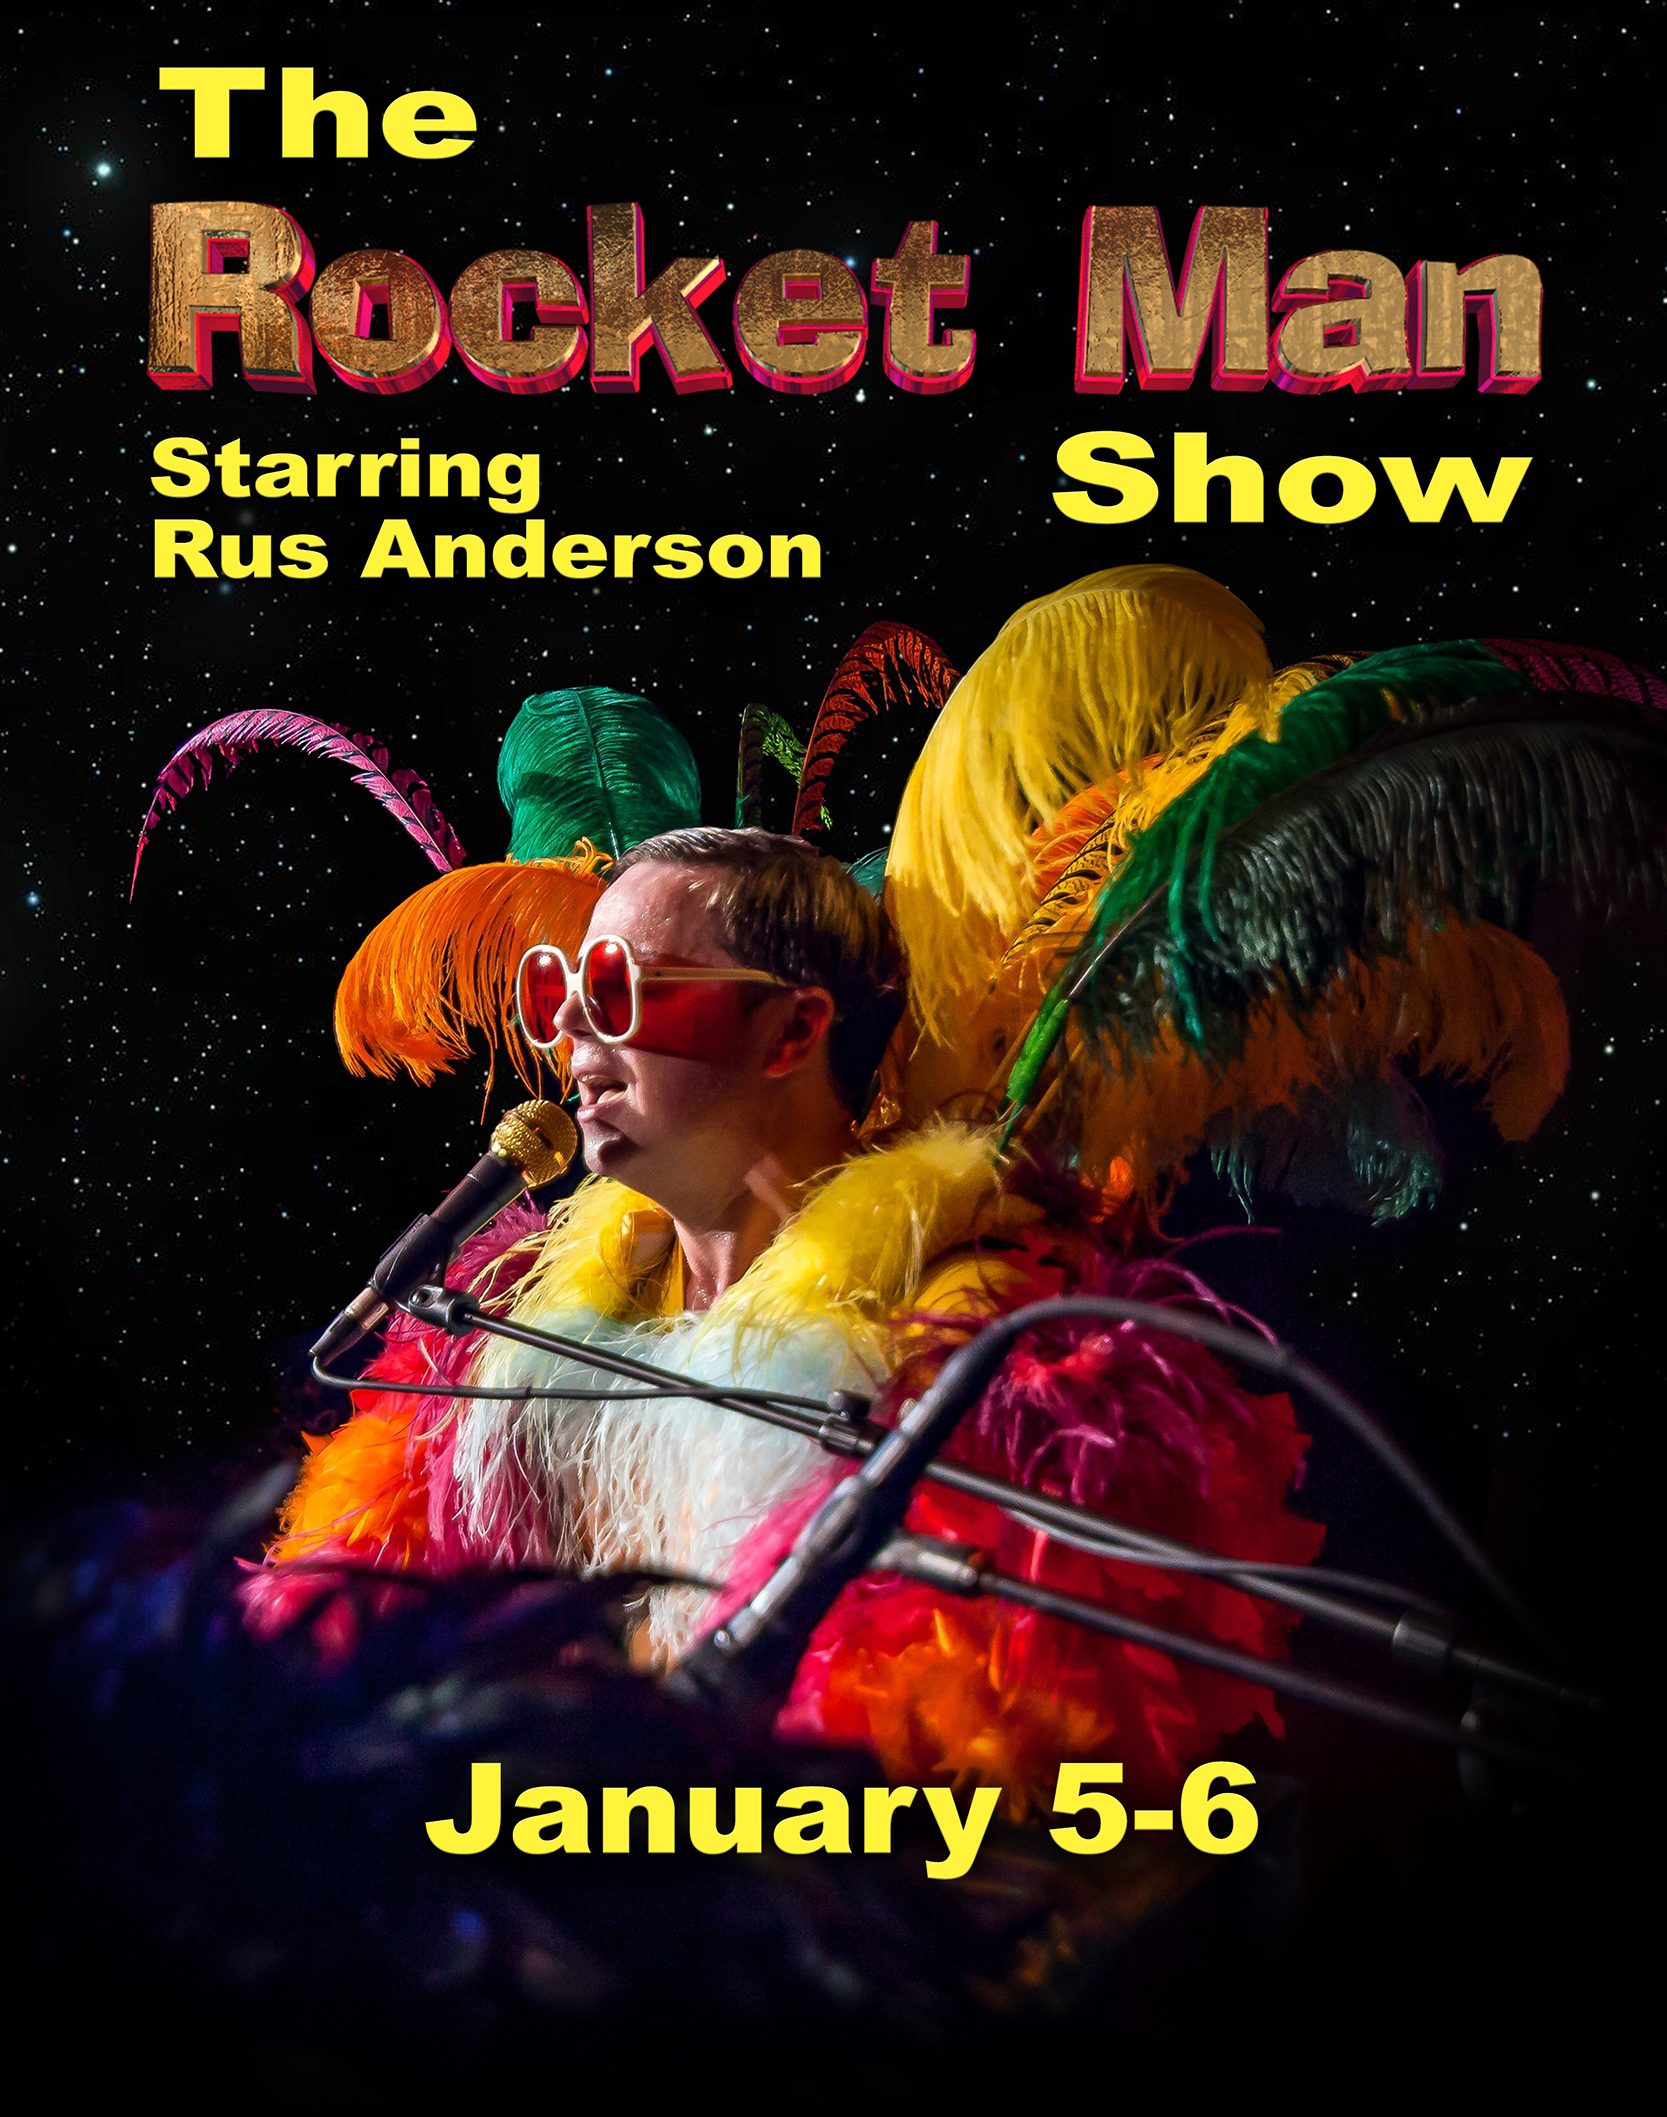 The Rocket Man Show Starring Rus Anderson, a tribute to the music of Elton John on January 5th and 6th